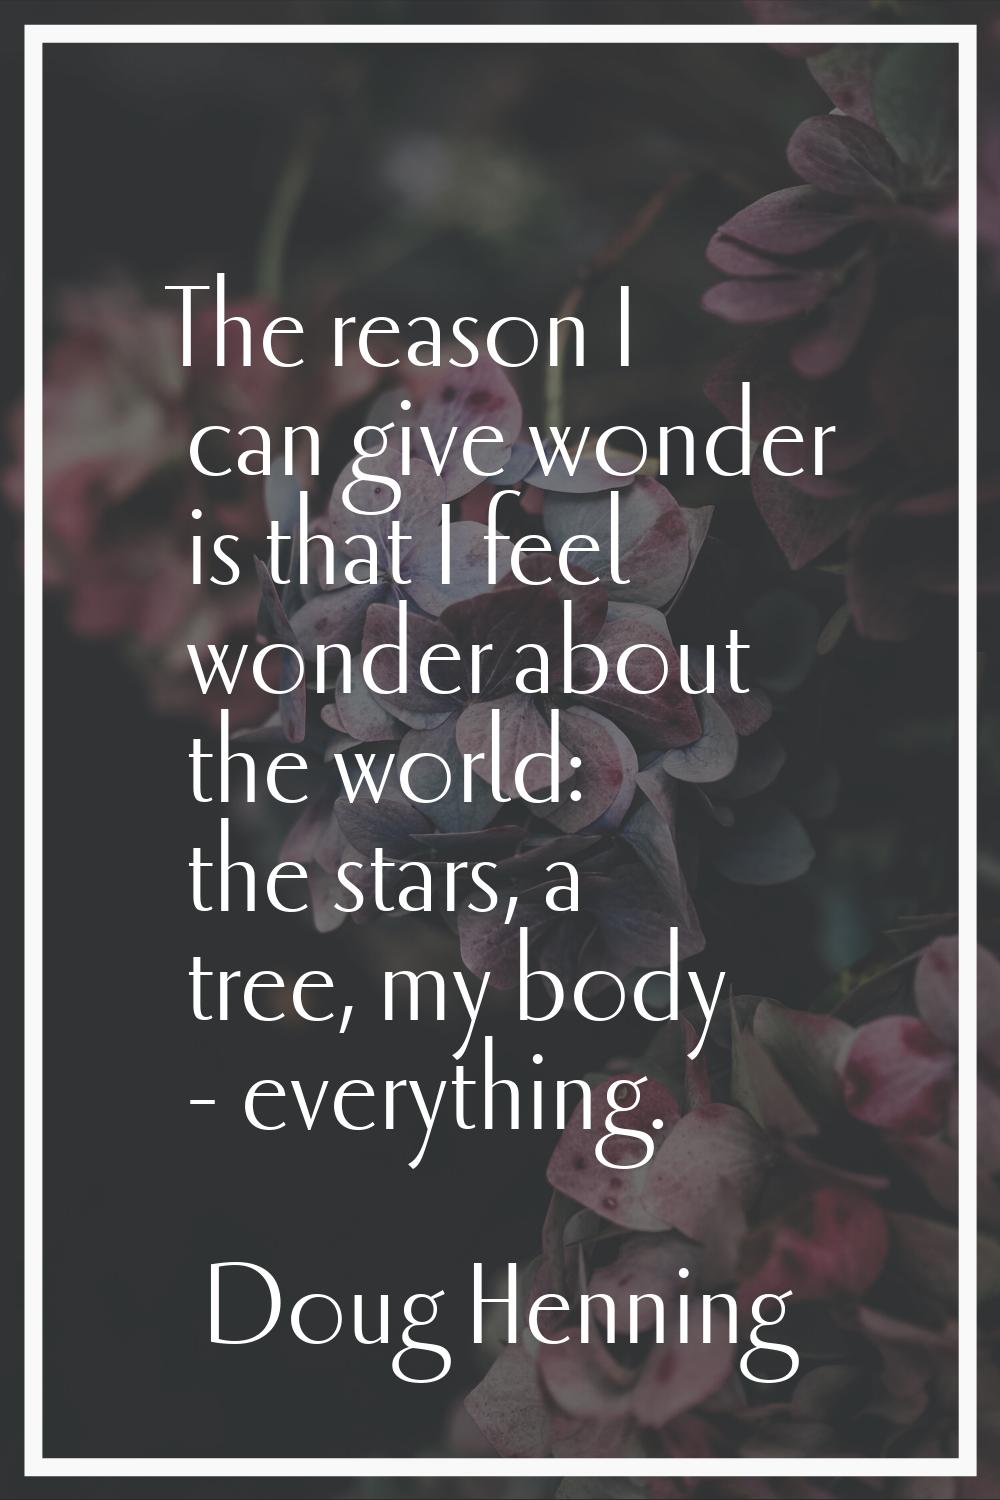 The reason I can give wonder is that I feel wonder about the world: the stars, a tree, my body - ev